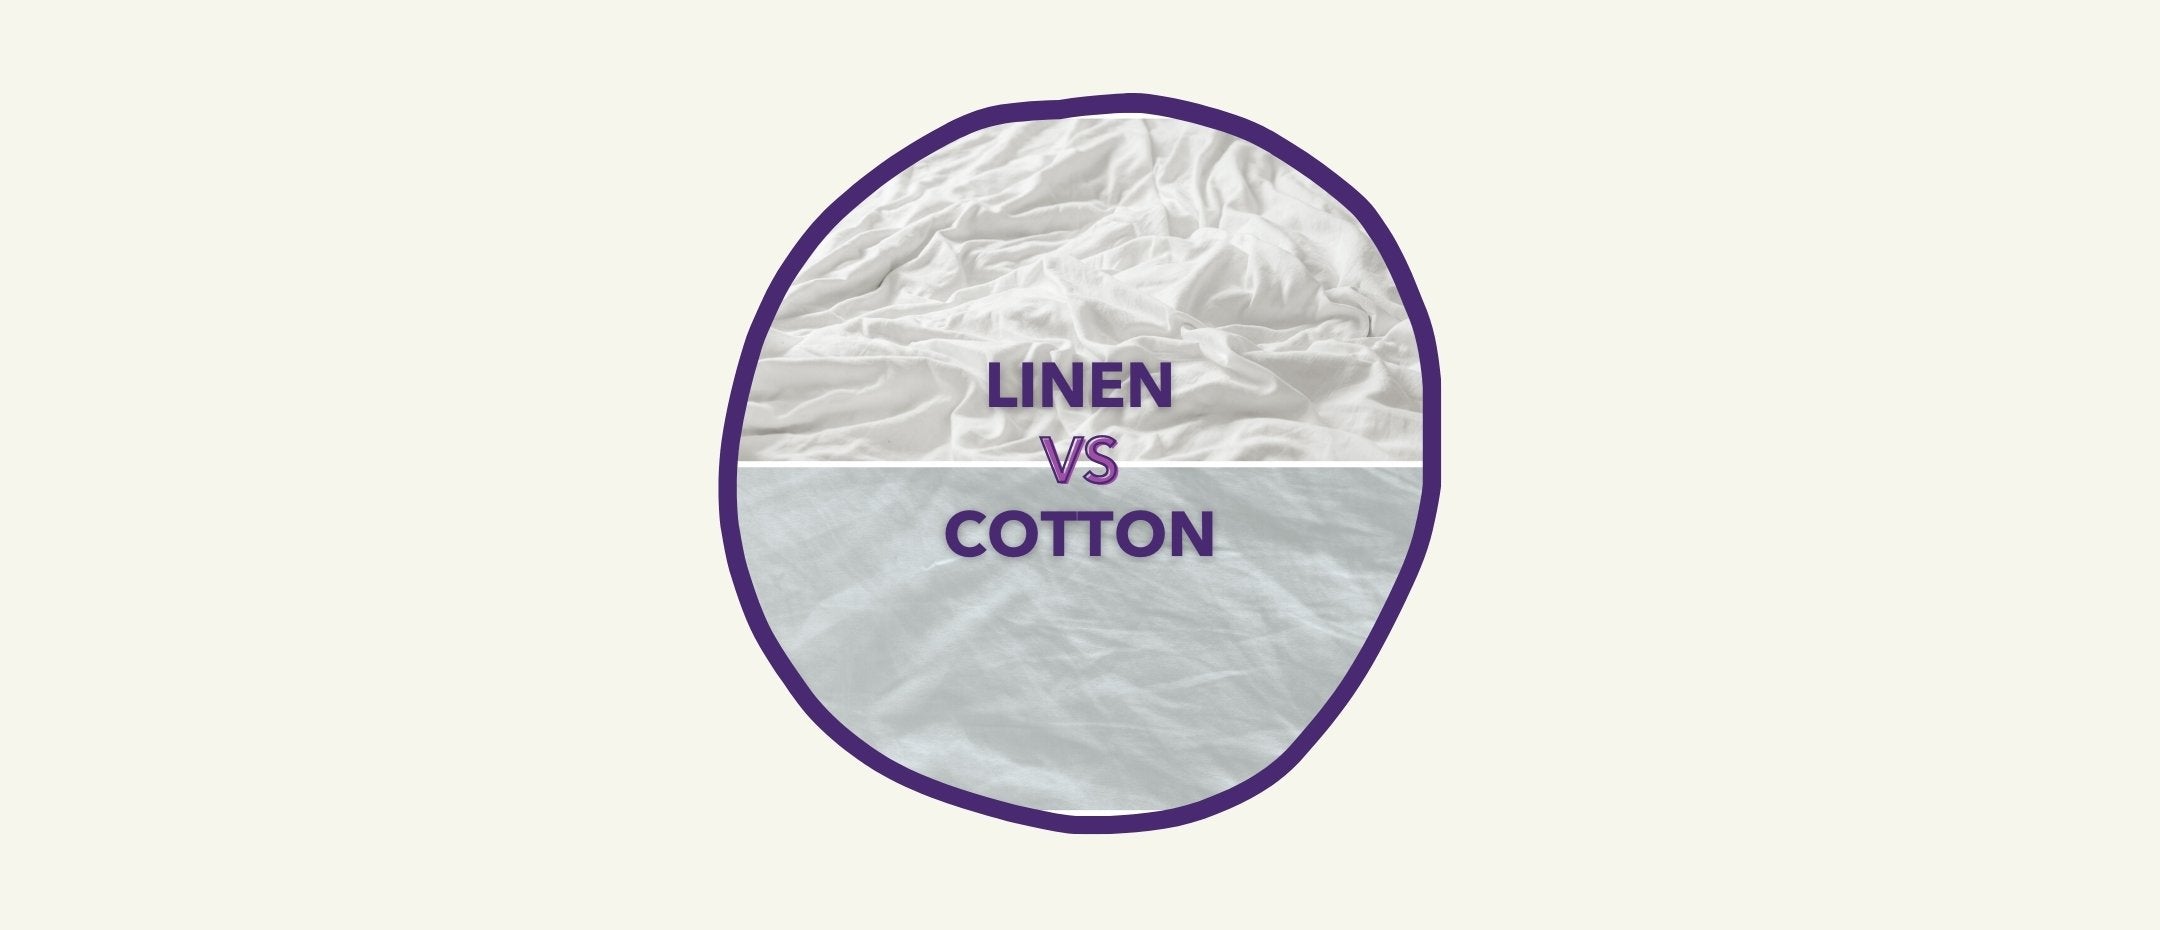 The comparison between linen and cotton sheets